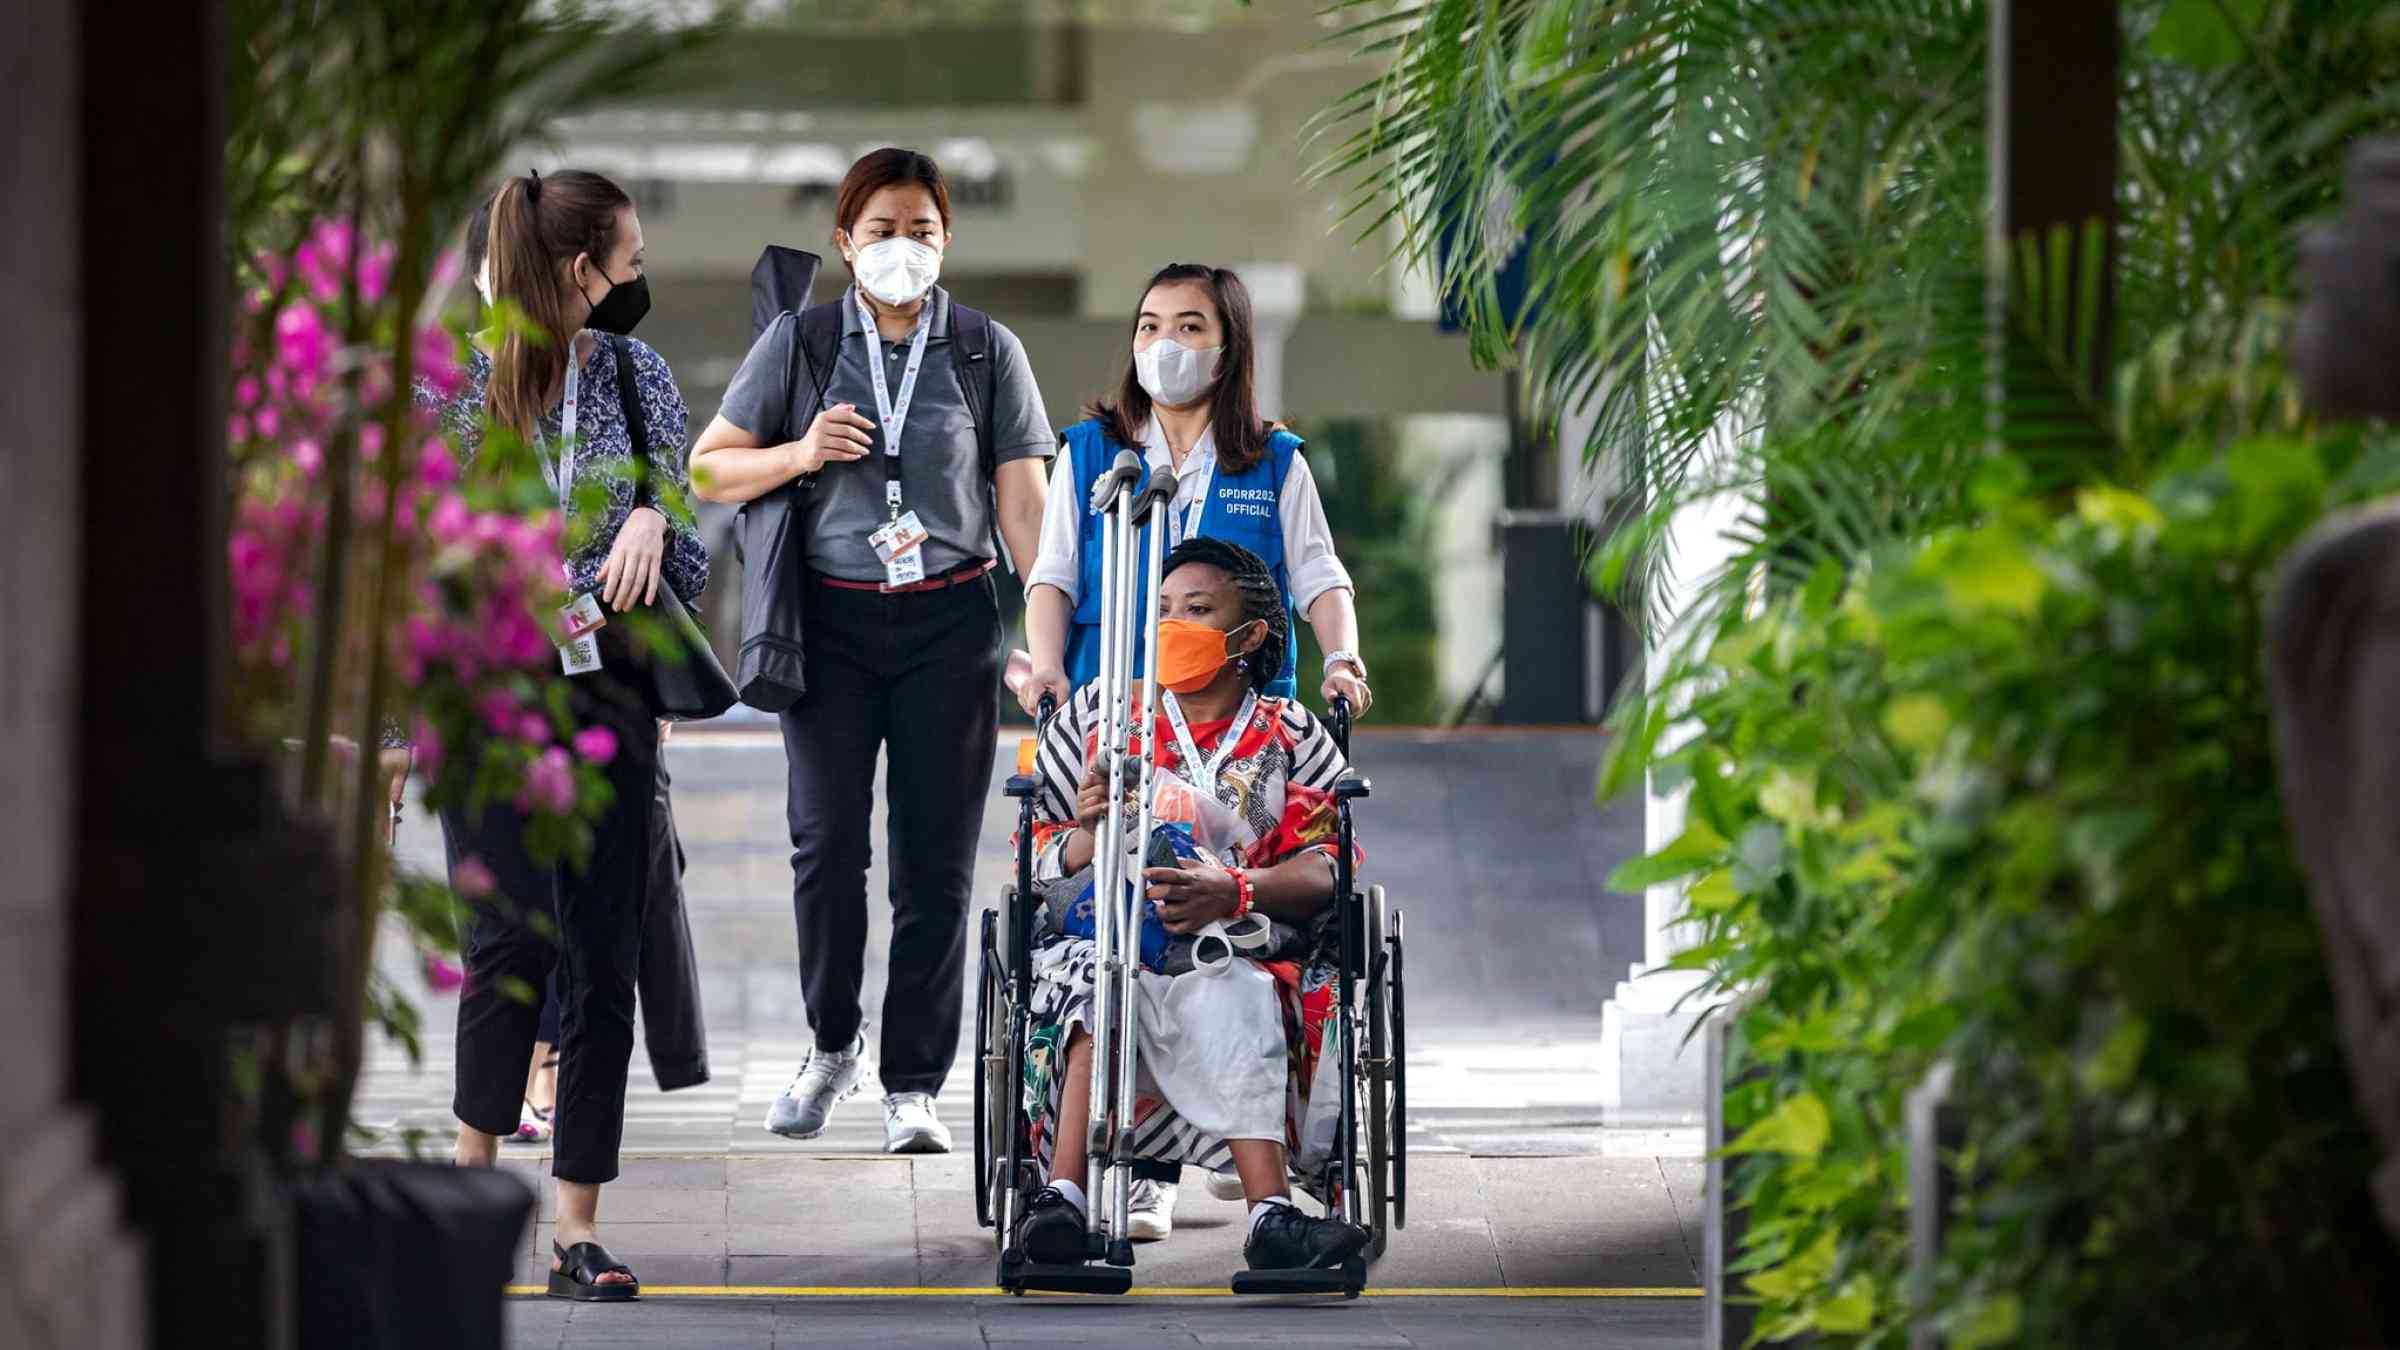 A woman being wheeled in a wheelchair at the 7th Global Platform for Disaster Risk Reduction, 27 May 2022, Bali, Indonesia